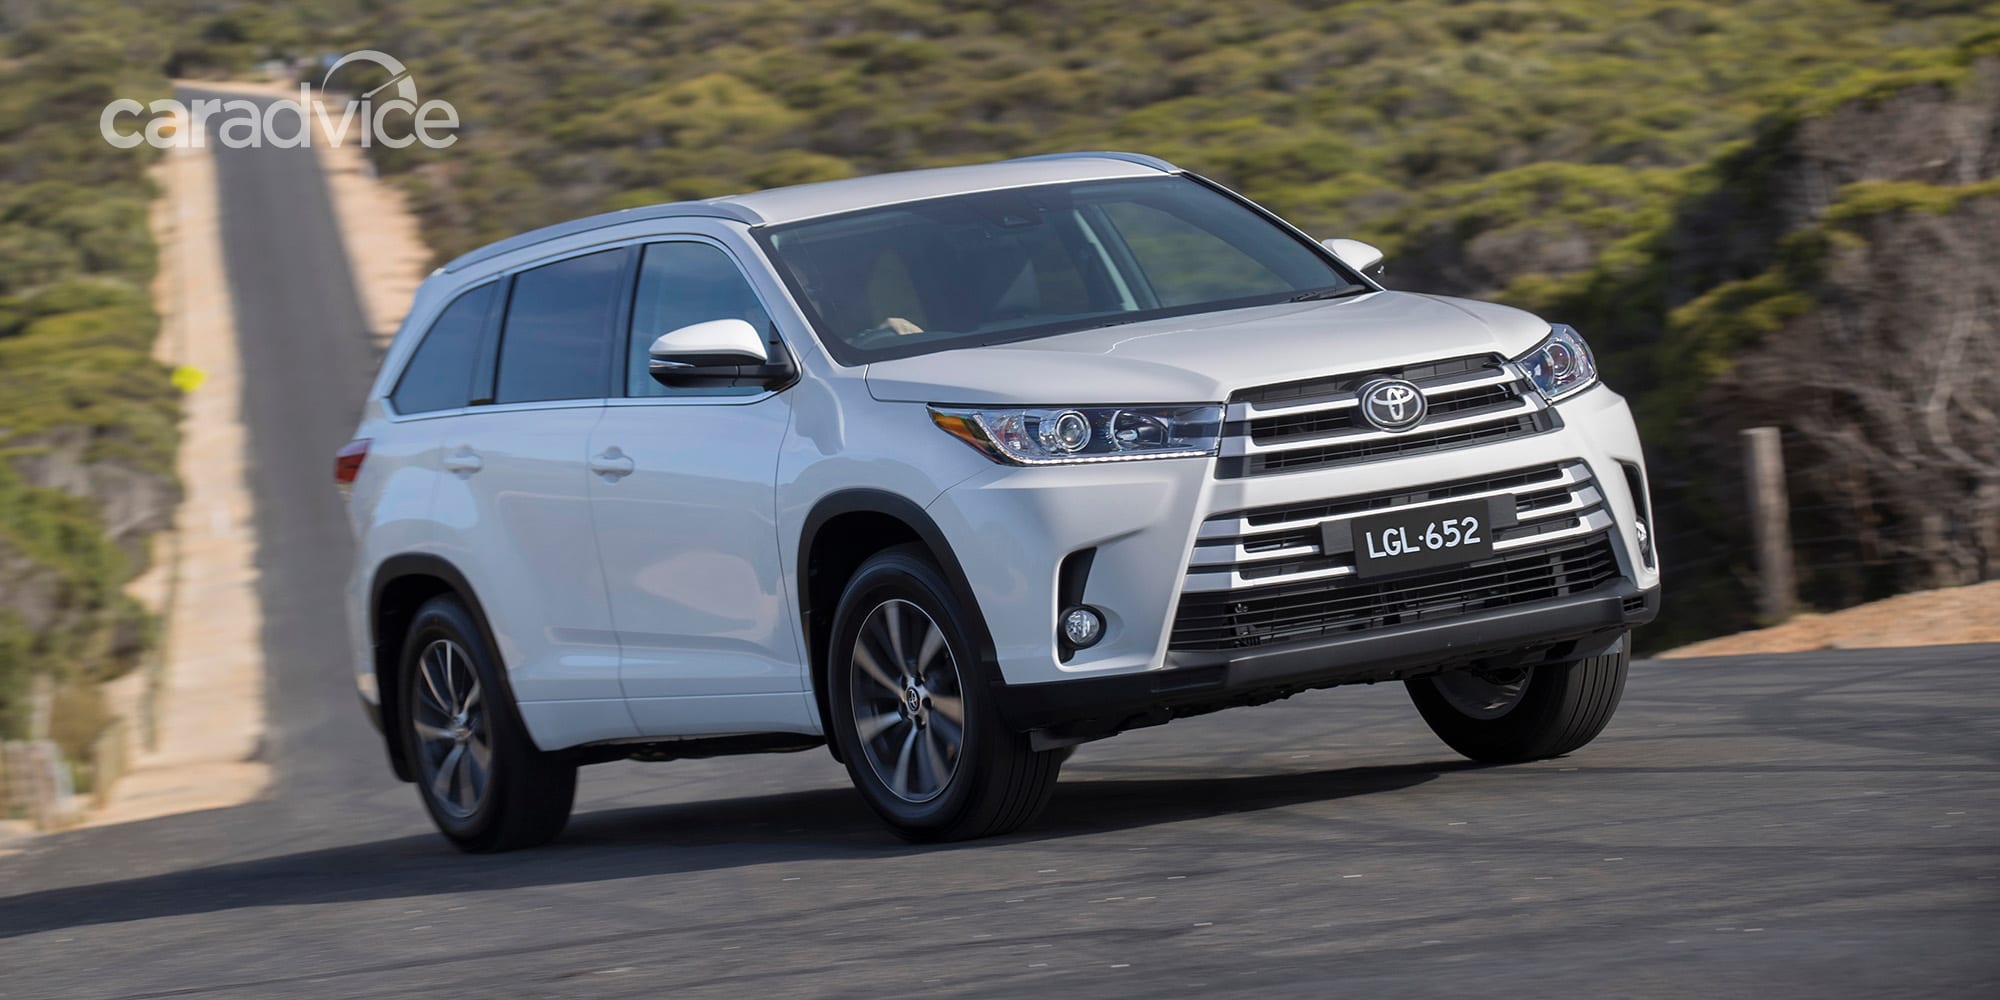 2018 Toyota Kluger pricing and specs | CarAdvice